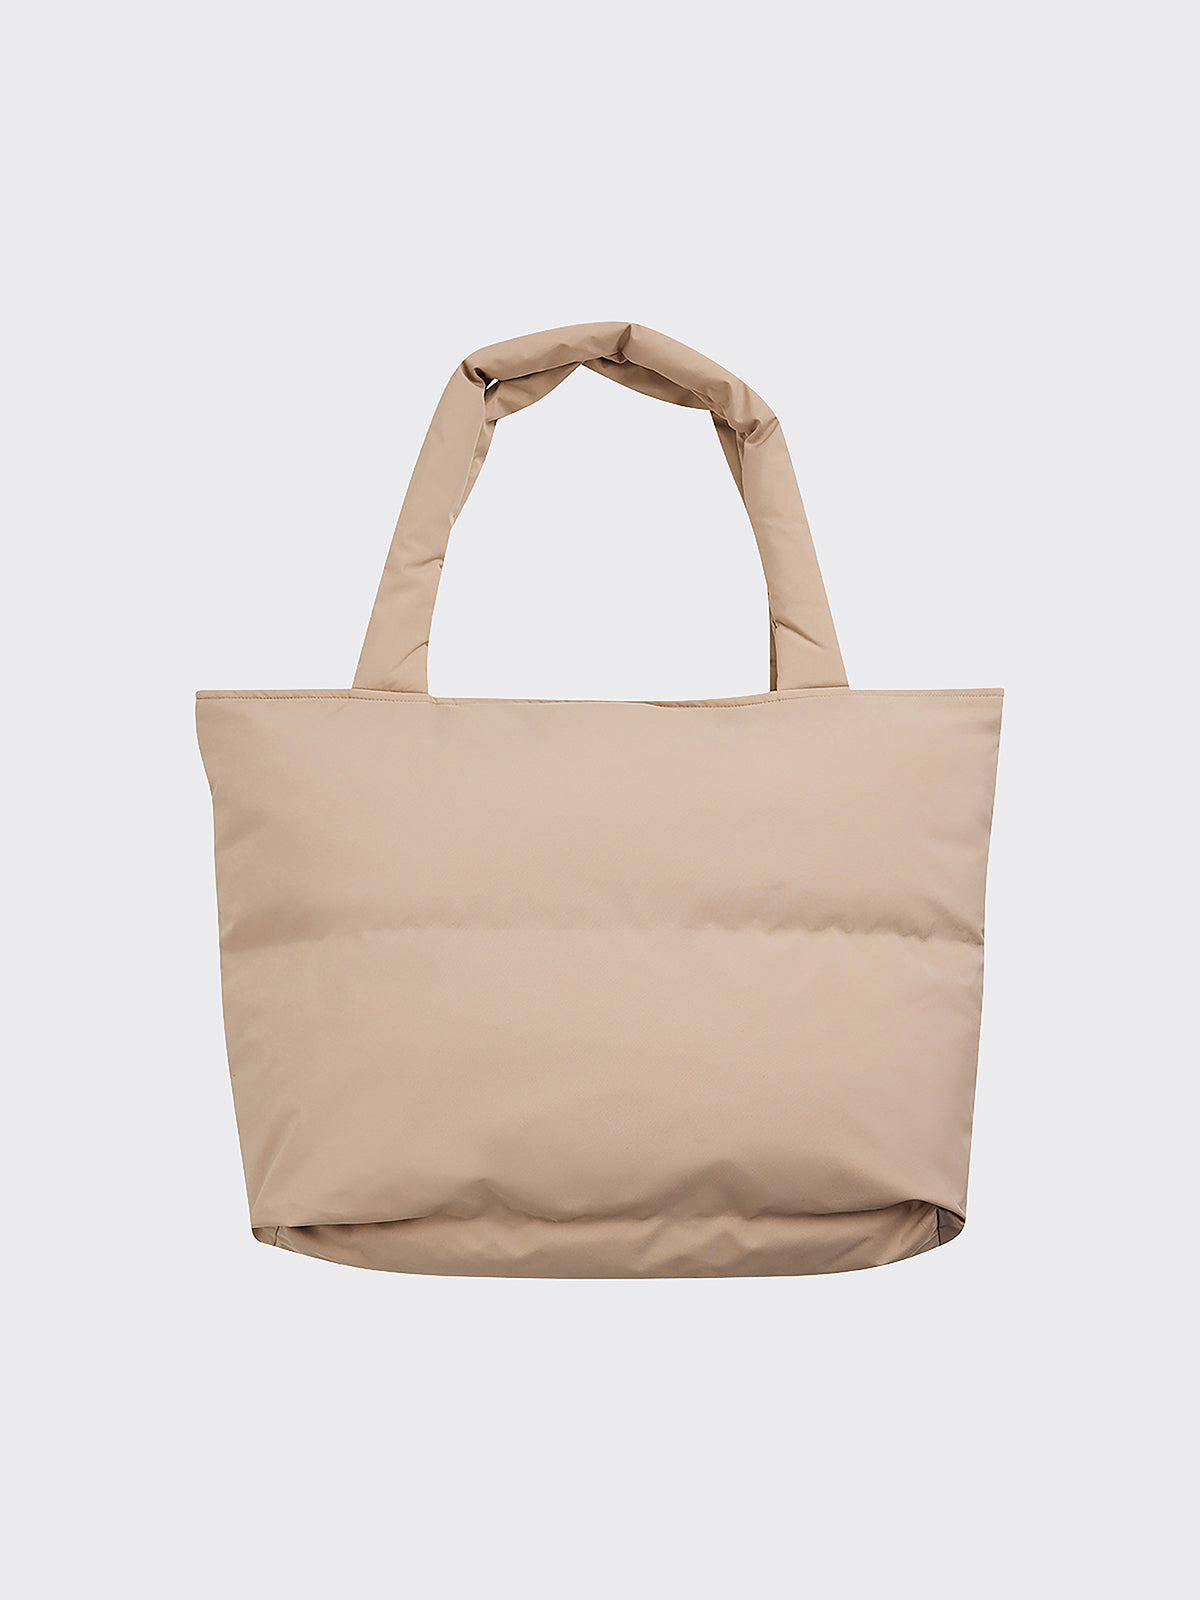 Pillow bag from Blæst in Beige